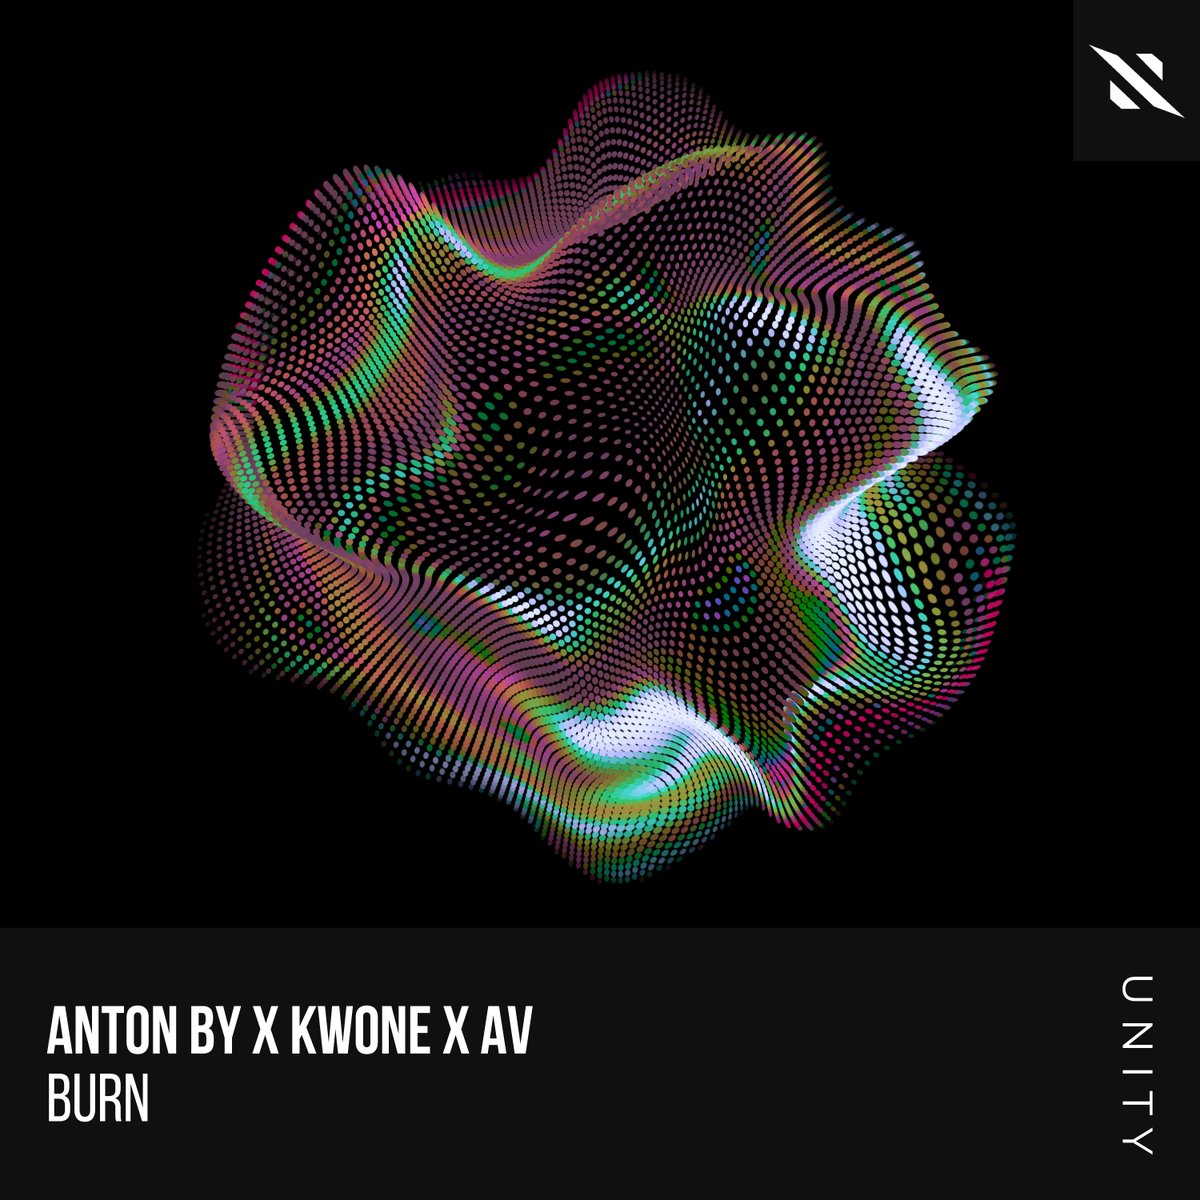 A powerful single 'Burn' from Anton By, @kwonemusic and AV is coming up tomorrow on Interplay Unity 🔥 #interplayrec Pre-order: interplay.ffm.to/itpu073